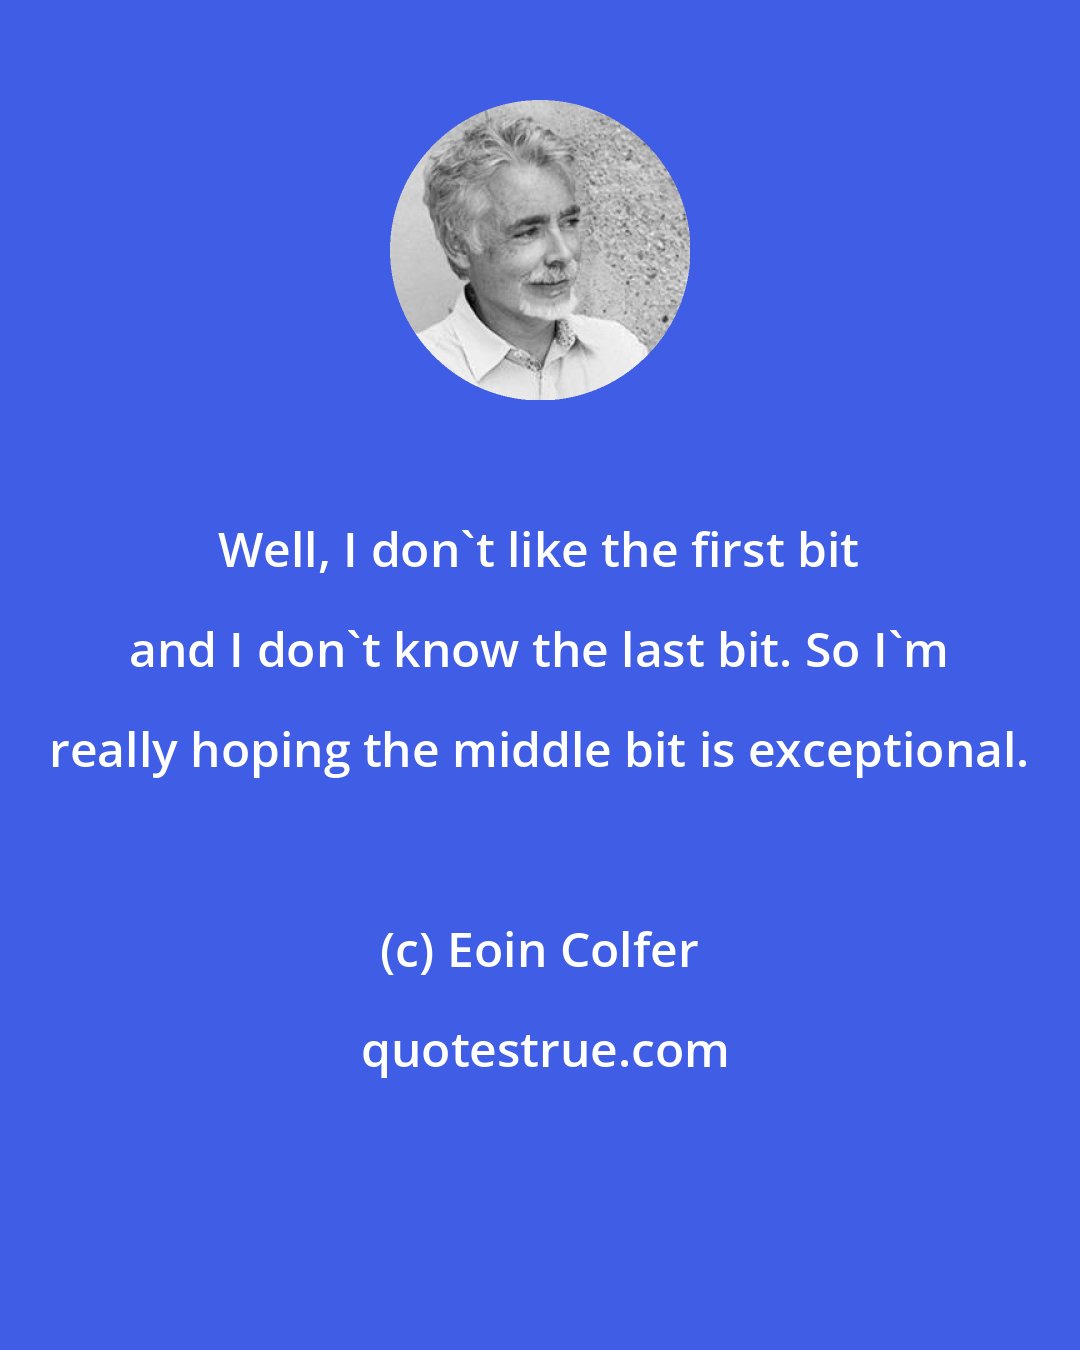 Eoin Colfer: Well, I don't like the first bit and I don't know the last bit. So I'm really hoping the middle bit is exceptional.